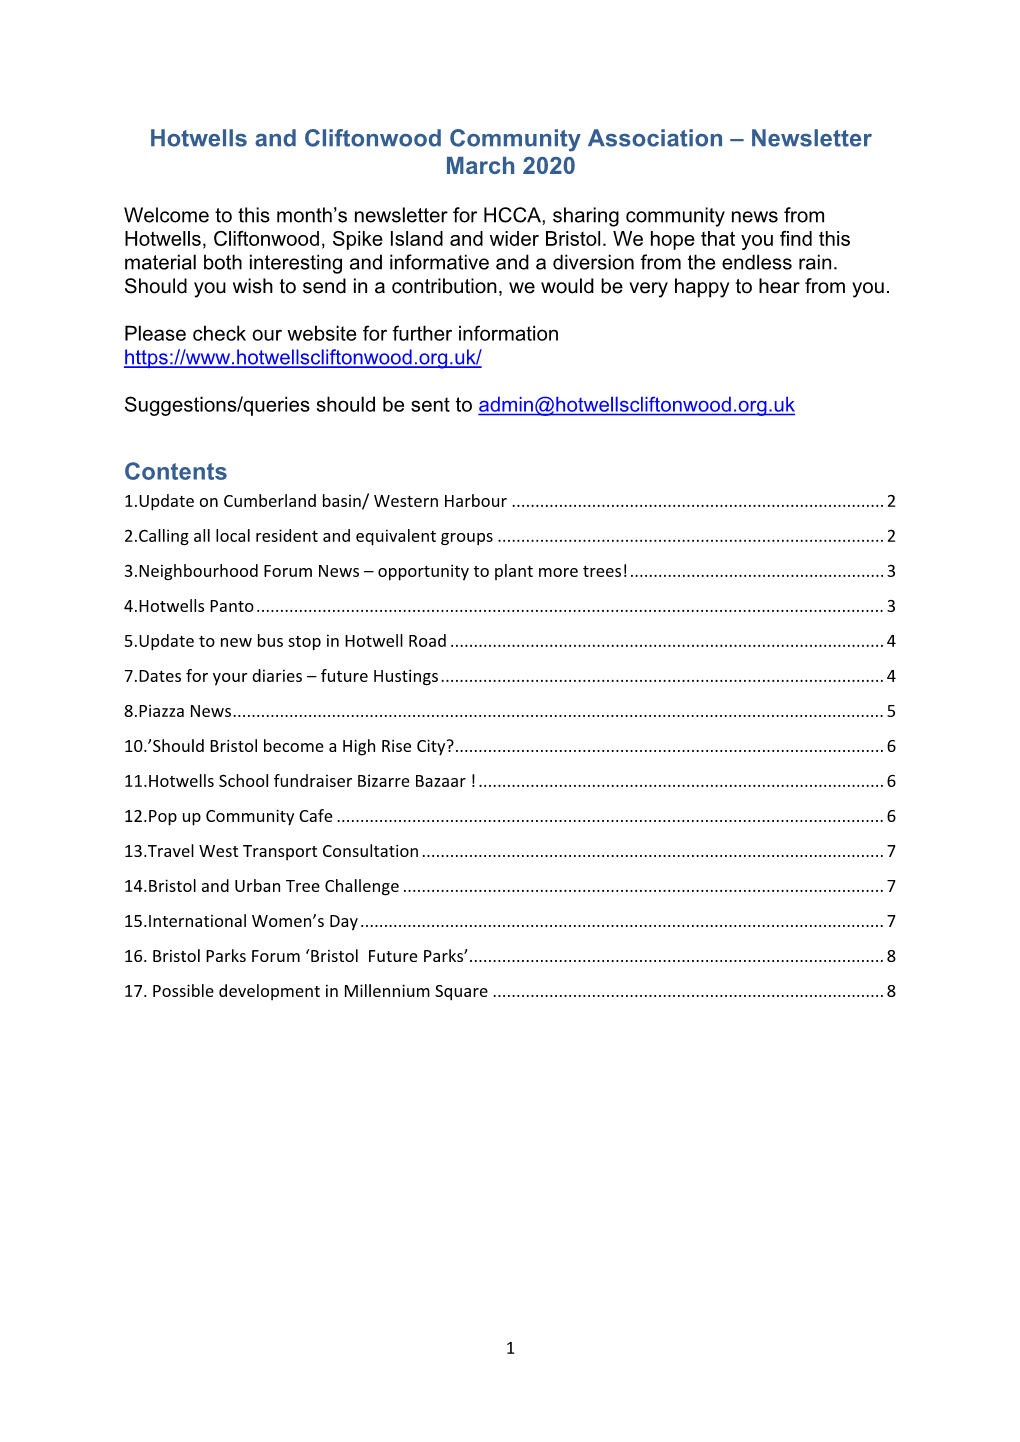 Hotwells and Cliftonwood Community Association – Newsletter March 2020 Contents